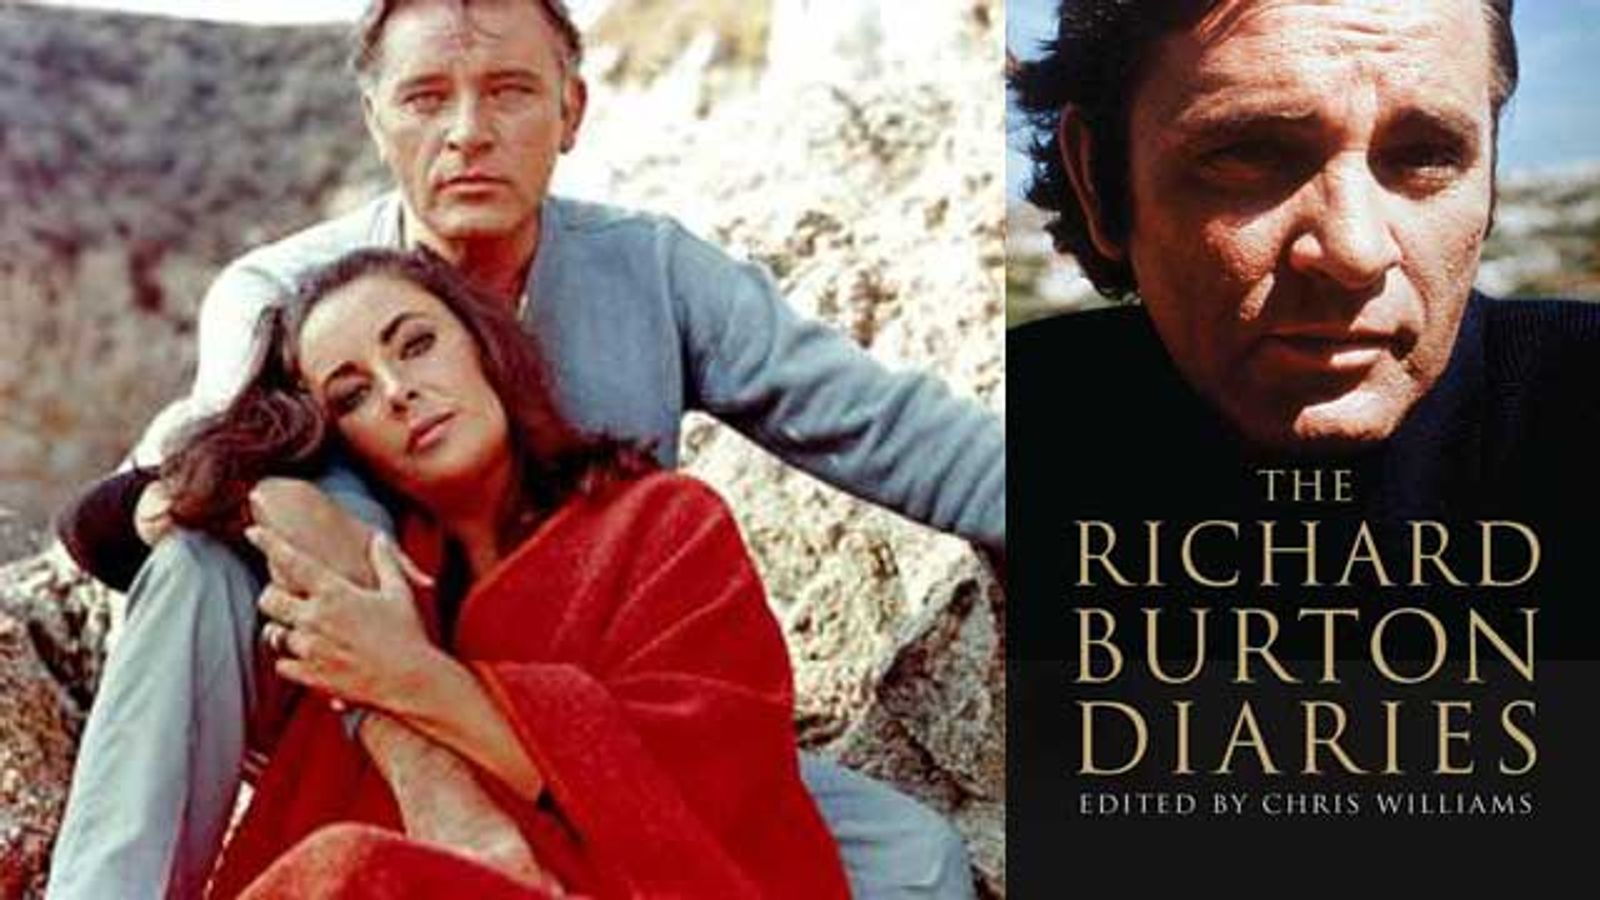 In Recently Published Diaries, Richard Burton Calls Porn Harmless